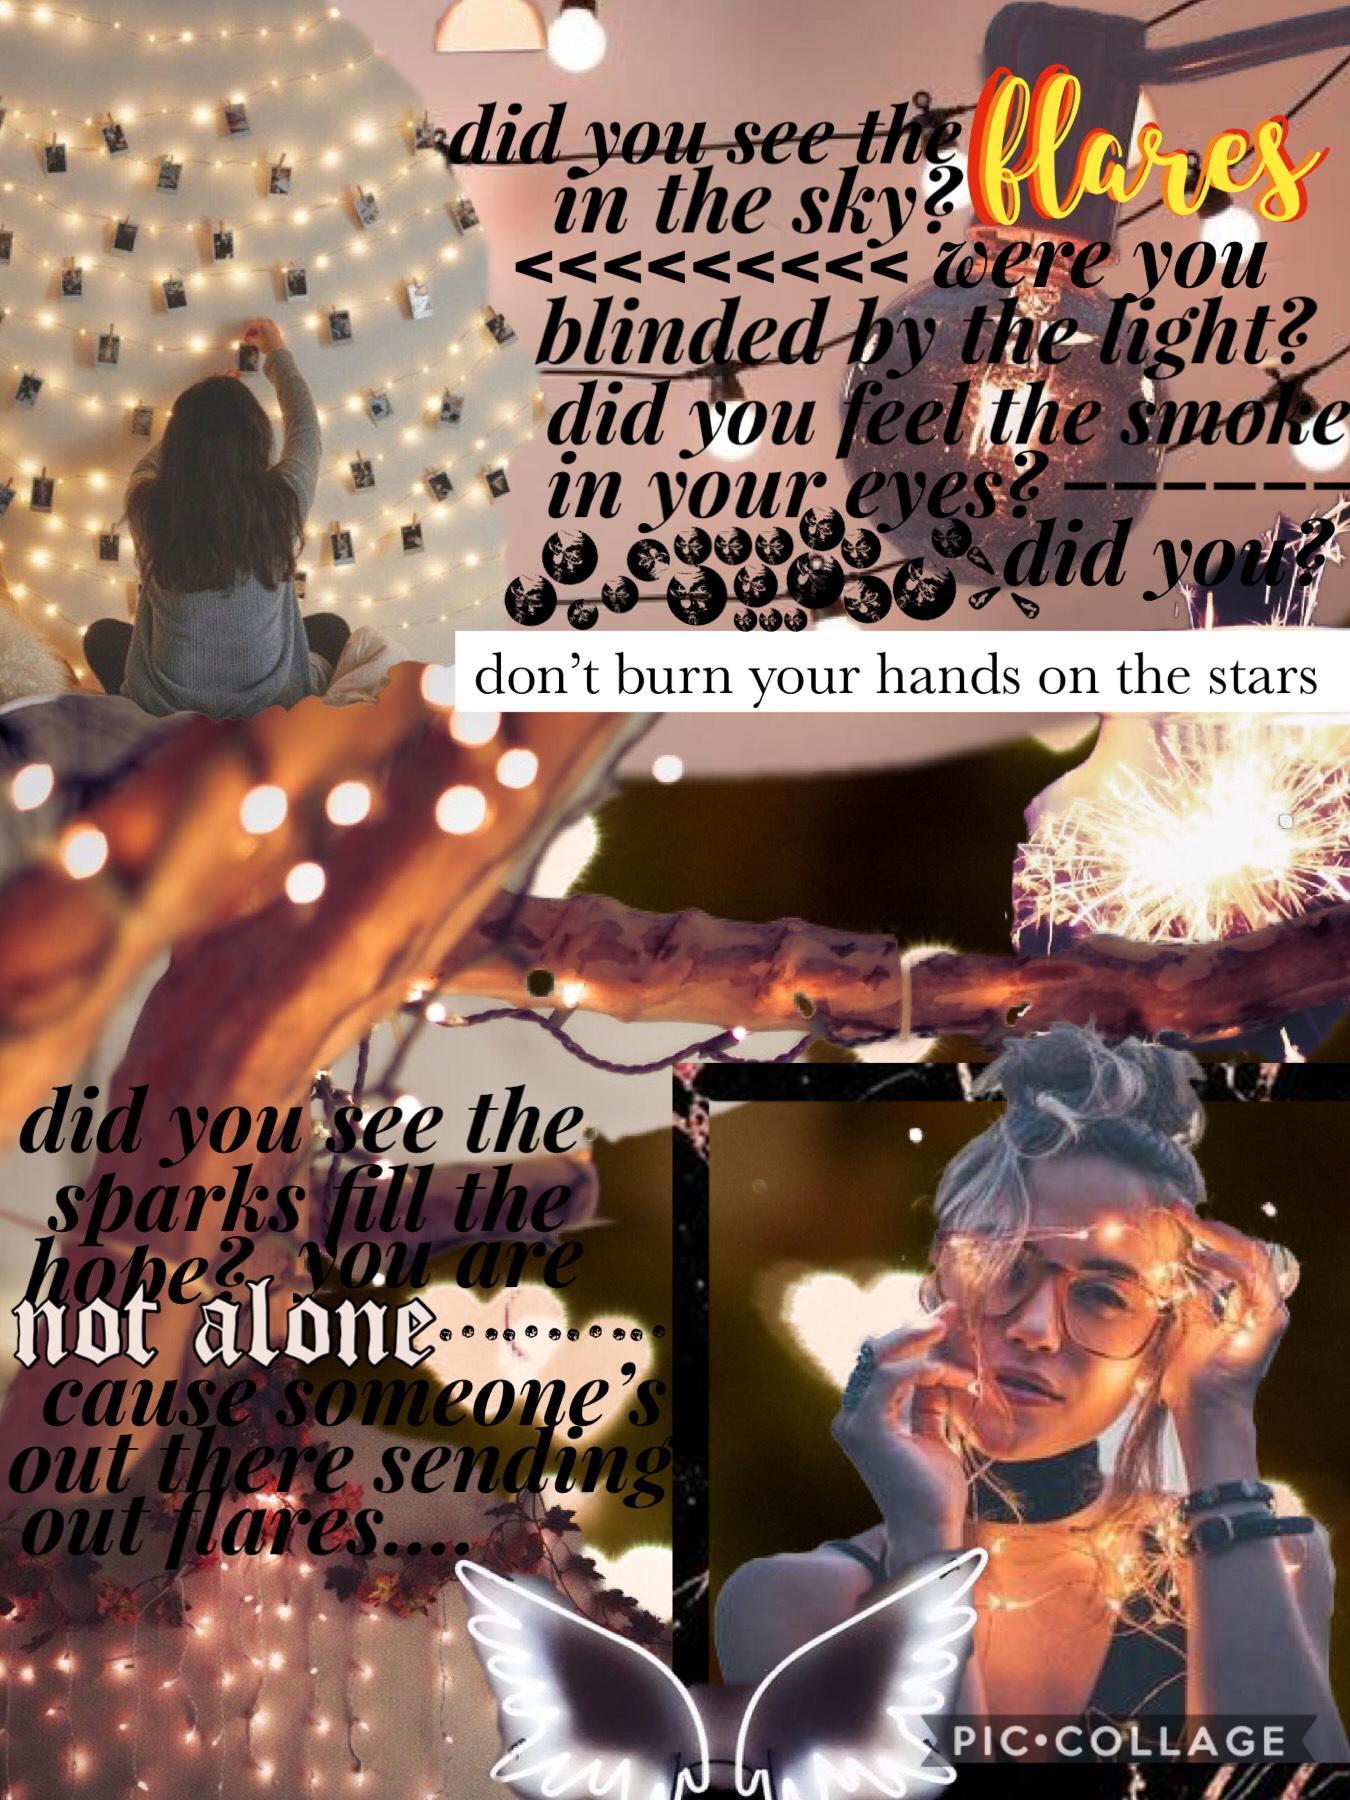 OMG! First collage in AGES!! I’m soooo sorry! I kinda unofficially left for a bit: family and school and all that but I’m back now and I missed you guys so much. Also I love this song: Flares by the script. Ever need something empowering to listen to? Thi